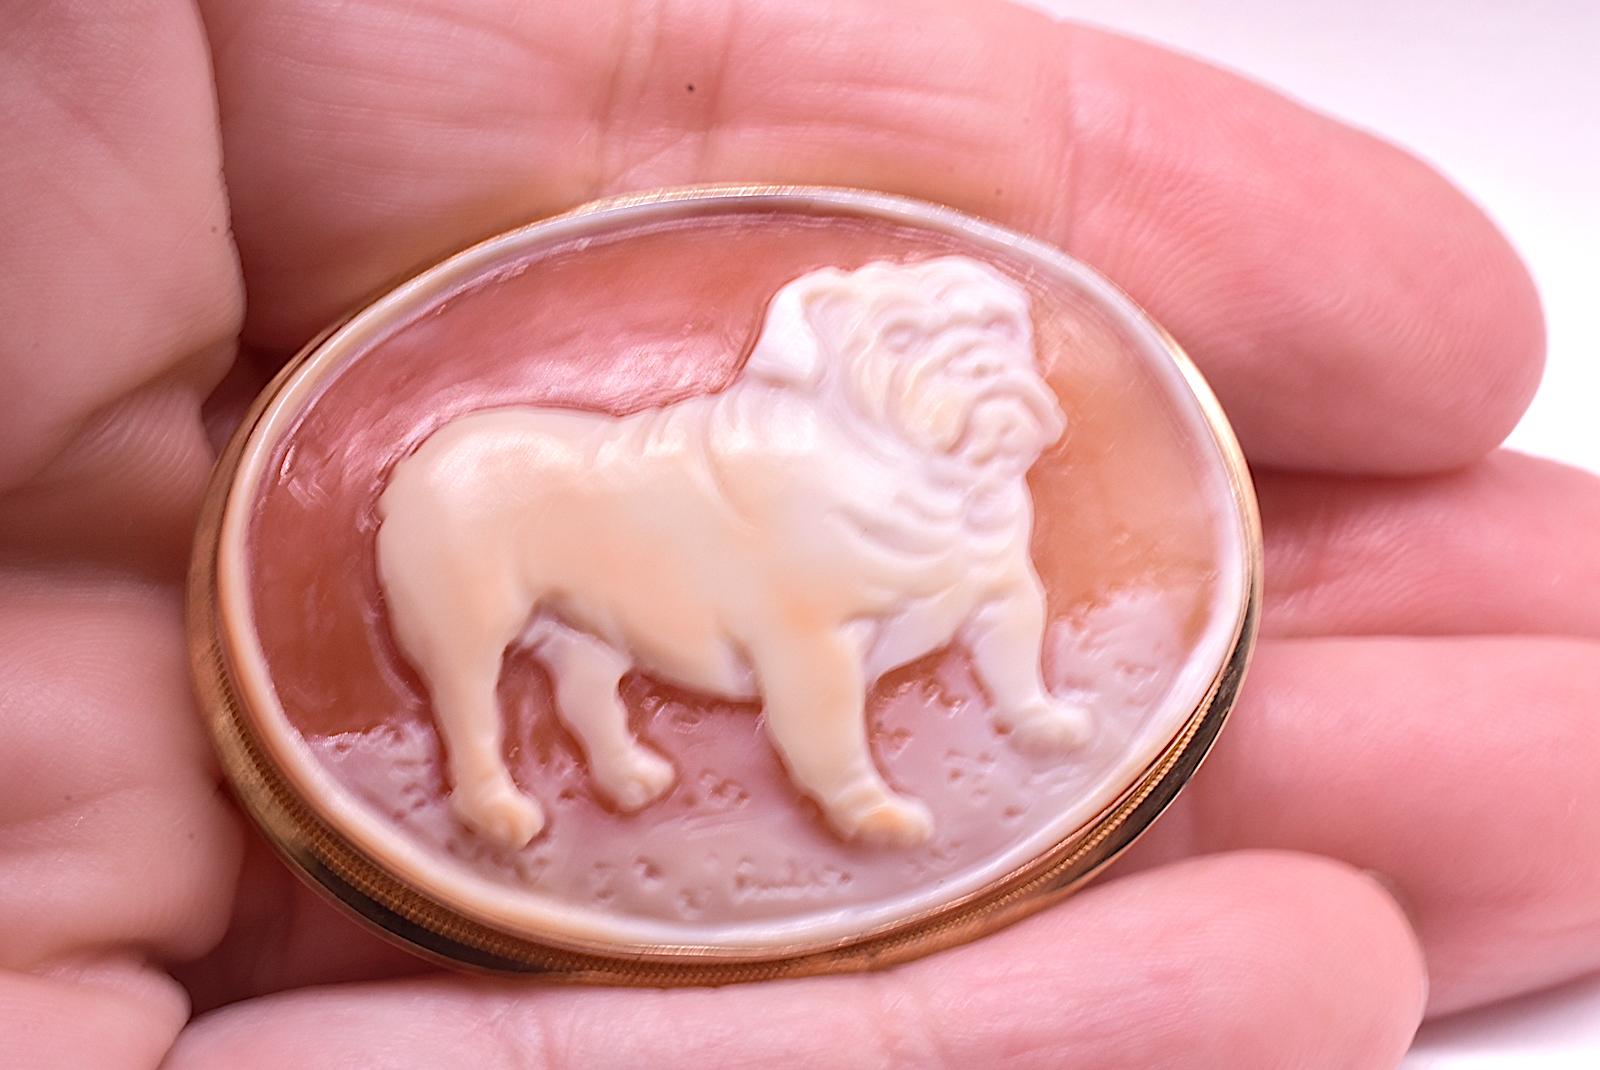 From Italy, we offer this impeccable brooch with a carving of the English bulldog.  The brooch is artfully hand carved and framed in a polished 9K bezel.  The gold bezel has an Italian hallmark with a 375 purity mark for 9K gold and a lozenge with